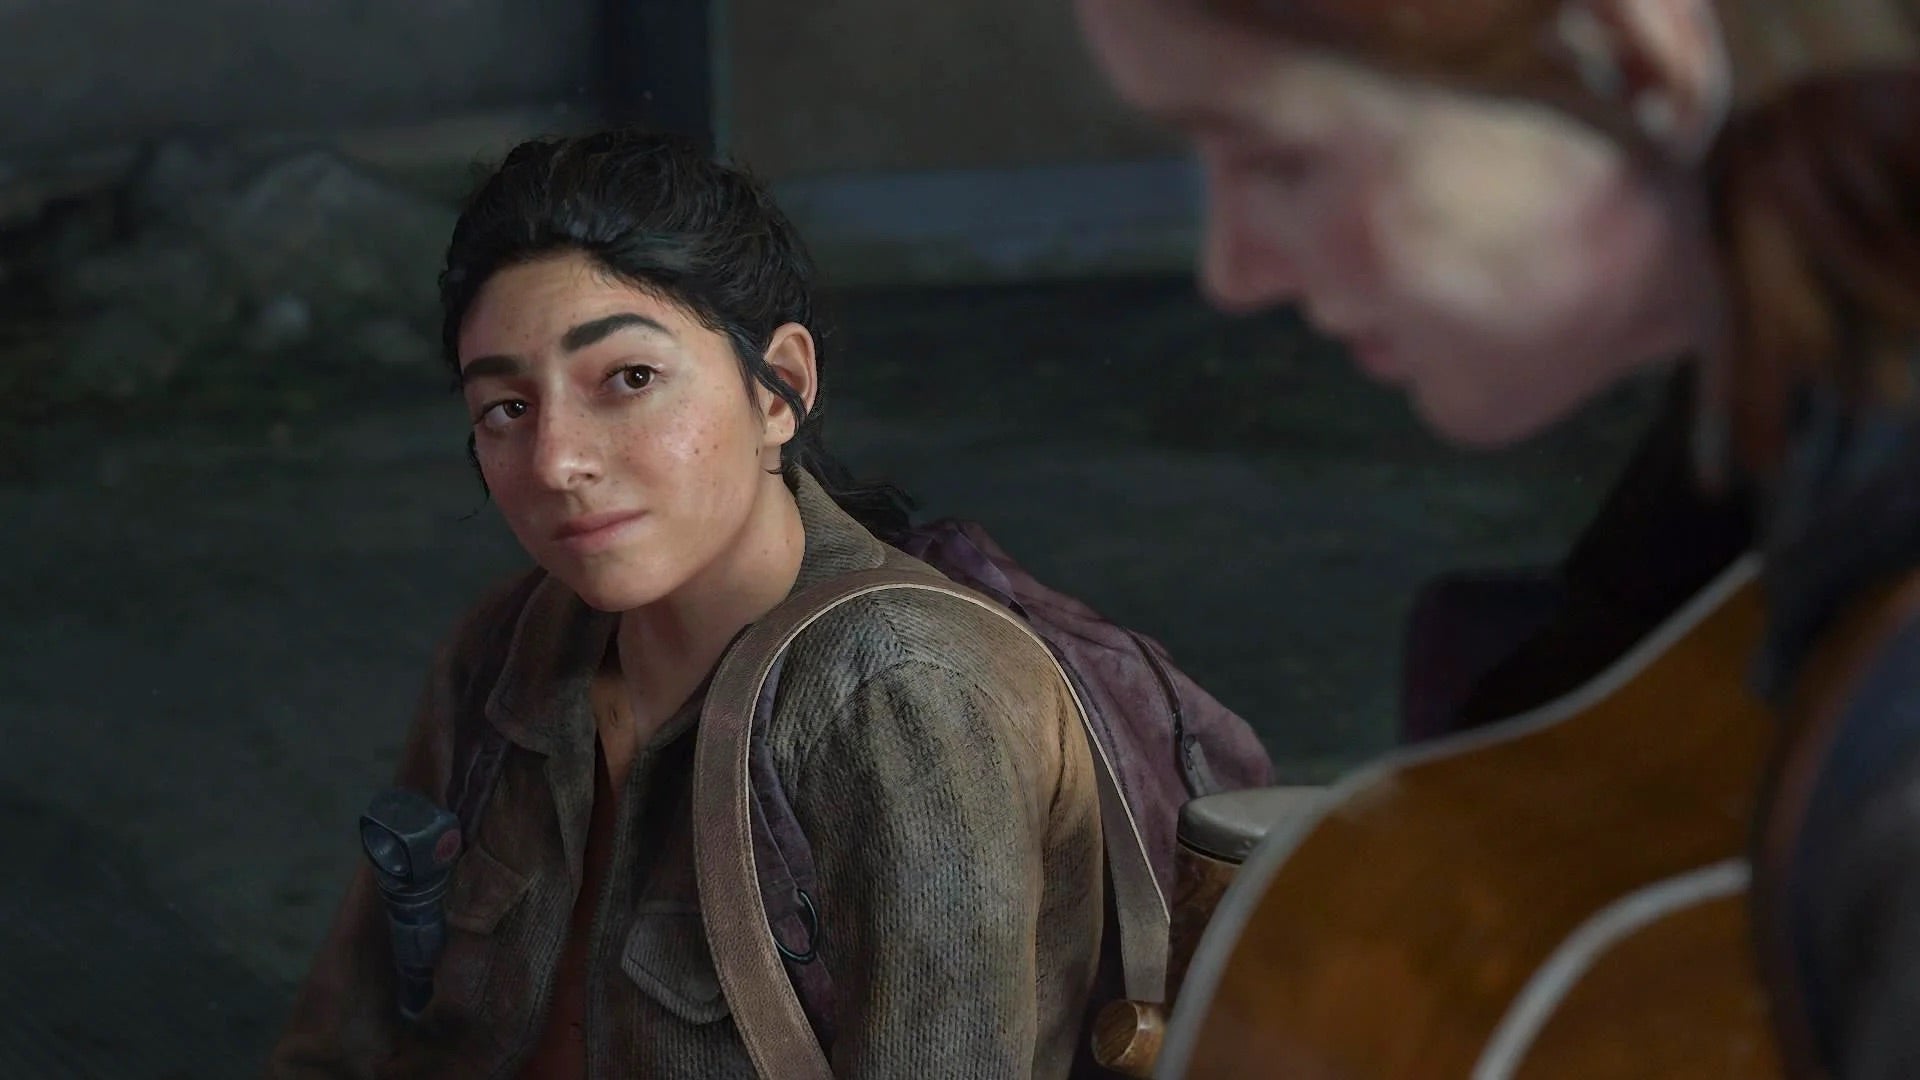 The Last of Us Part 2 Remaster Confirms Ellie's Surname for the